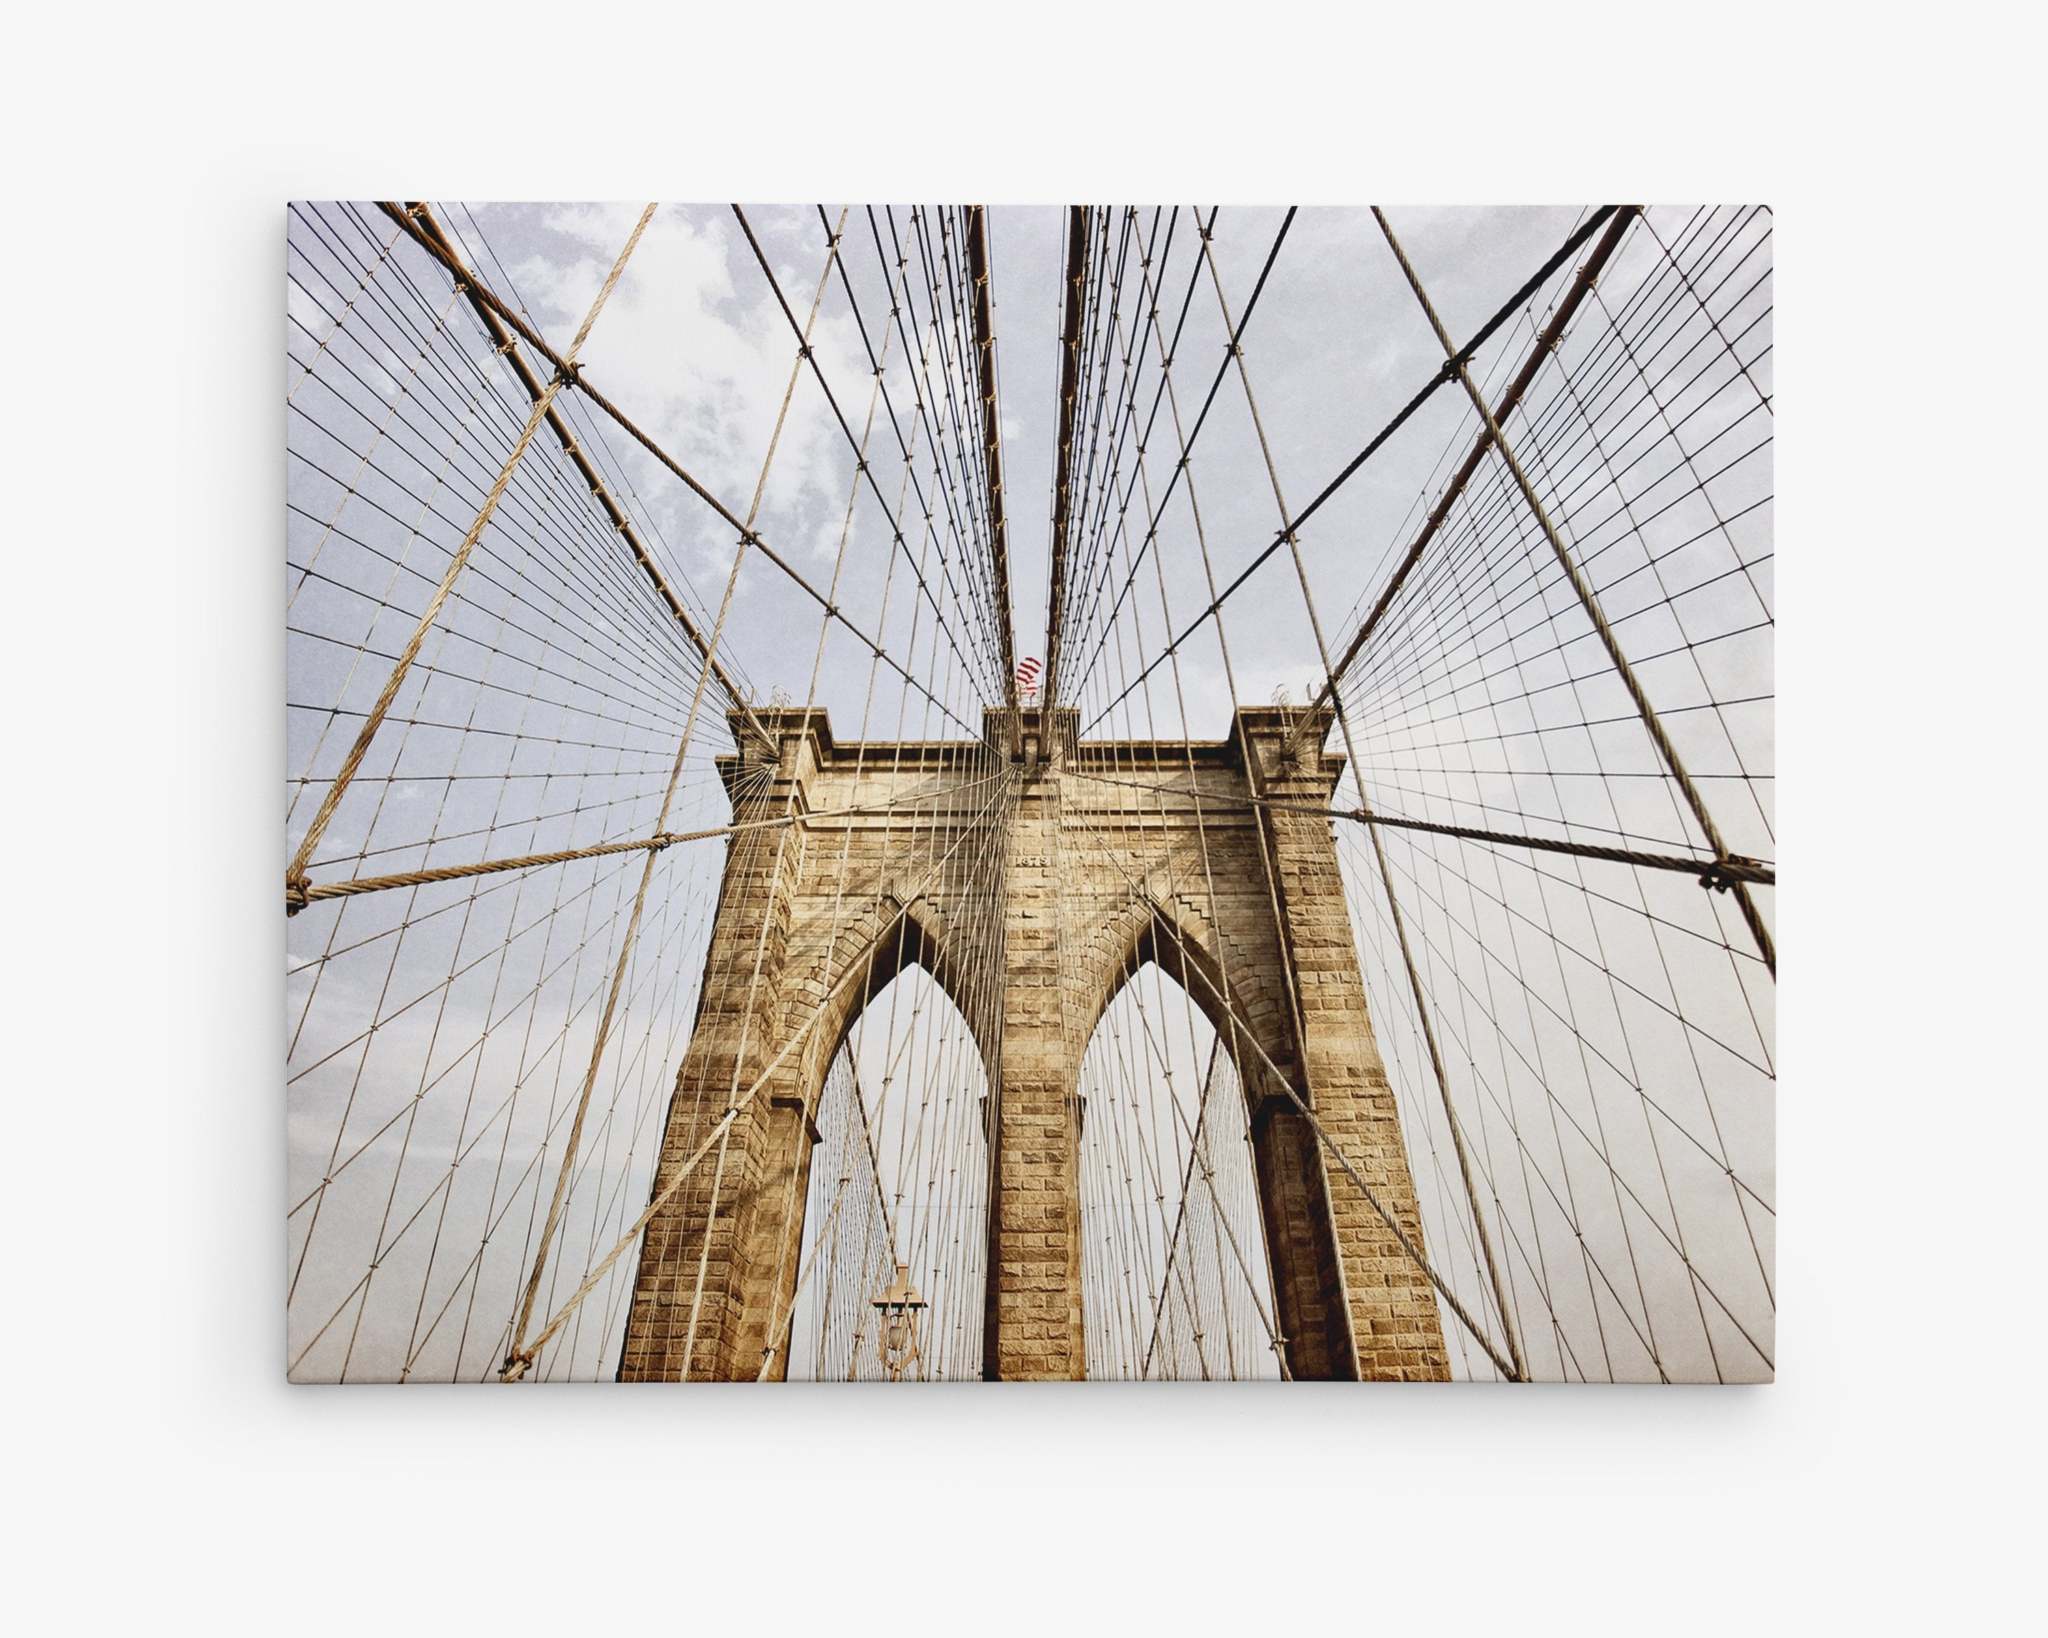 A low-angle view of the Brooklyn Bridge&#39;s stone arches and intricate cable system against a cloudy sky. The symmetrical design and perspective emphasize the bridge&#39;s architectural details and grandeur, all captured on premium artist-grade canvas for an exquisite finish with Offley Green&#39;s New York City Canvas Wall Art, &#39;Brooklyn Wires&#39;.